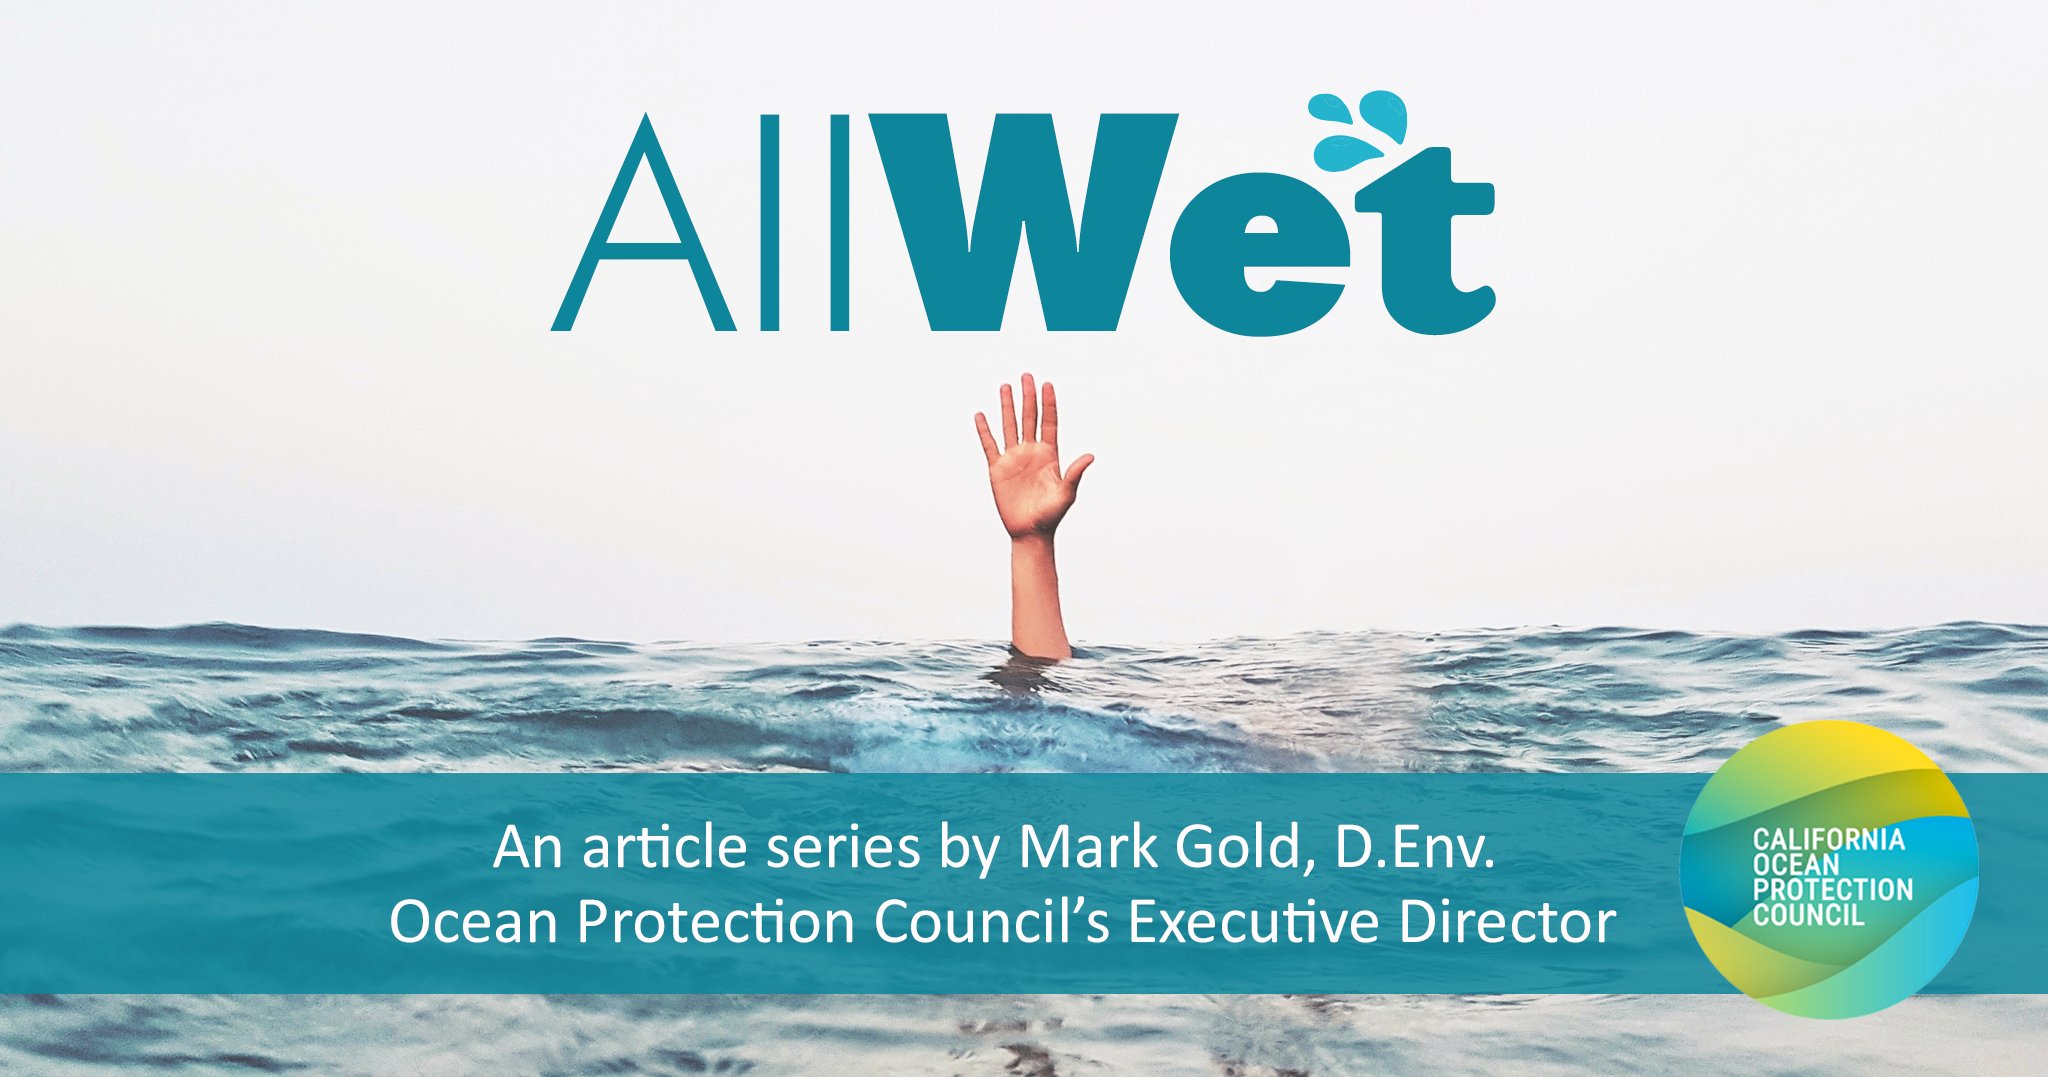 All Wet: An article Series by Mark Gold